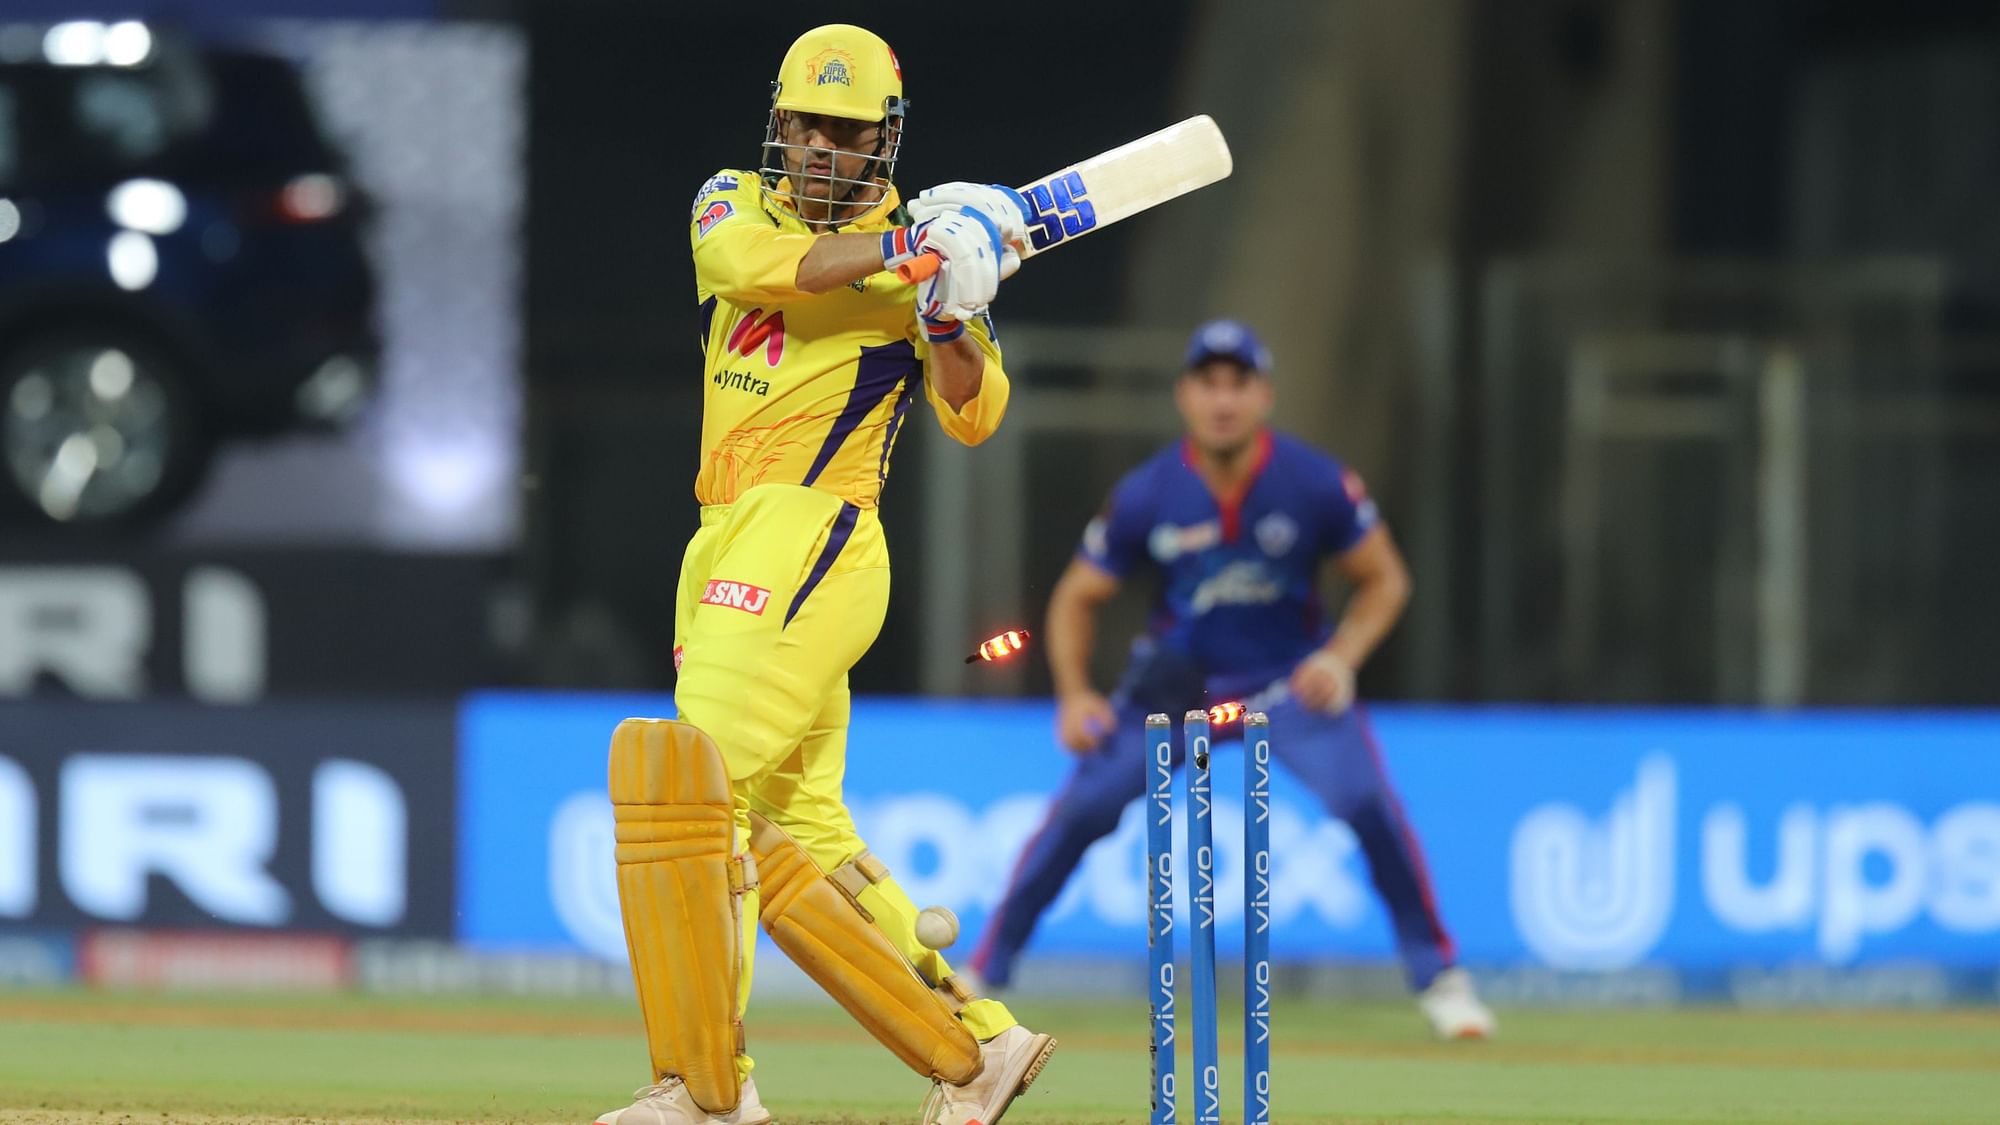 MS Dhoni was dismissed for a duck off the second ball by Avesh Khan.&nbsp;